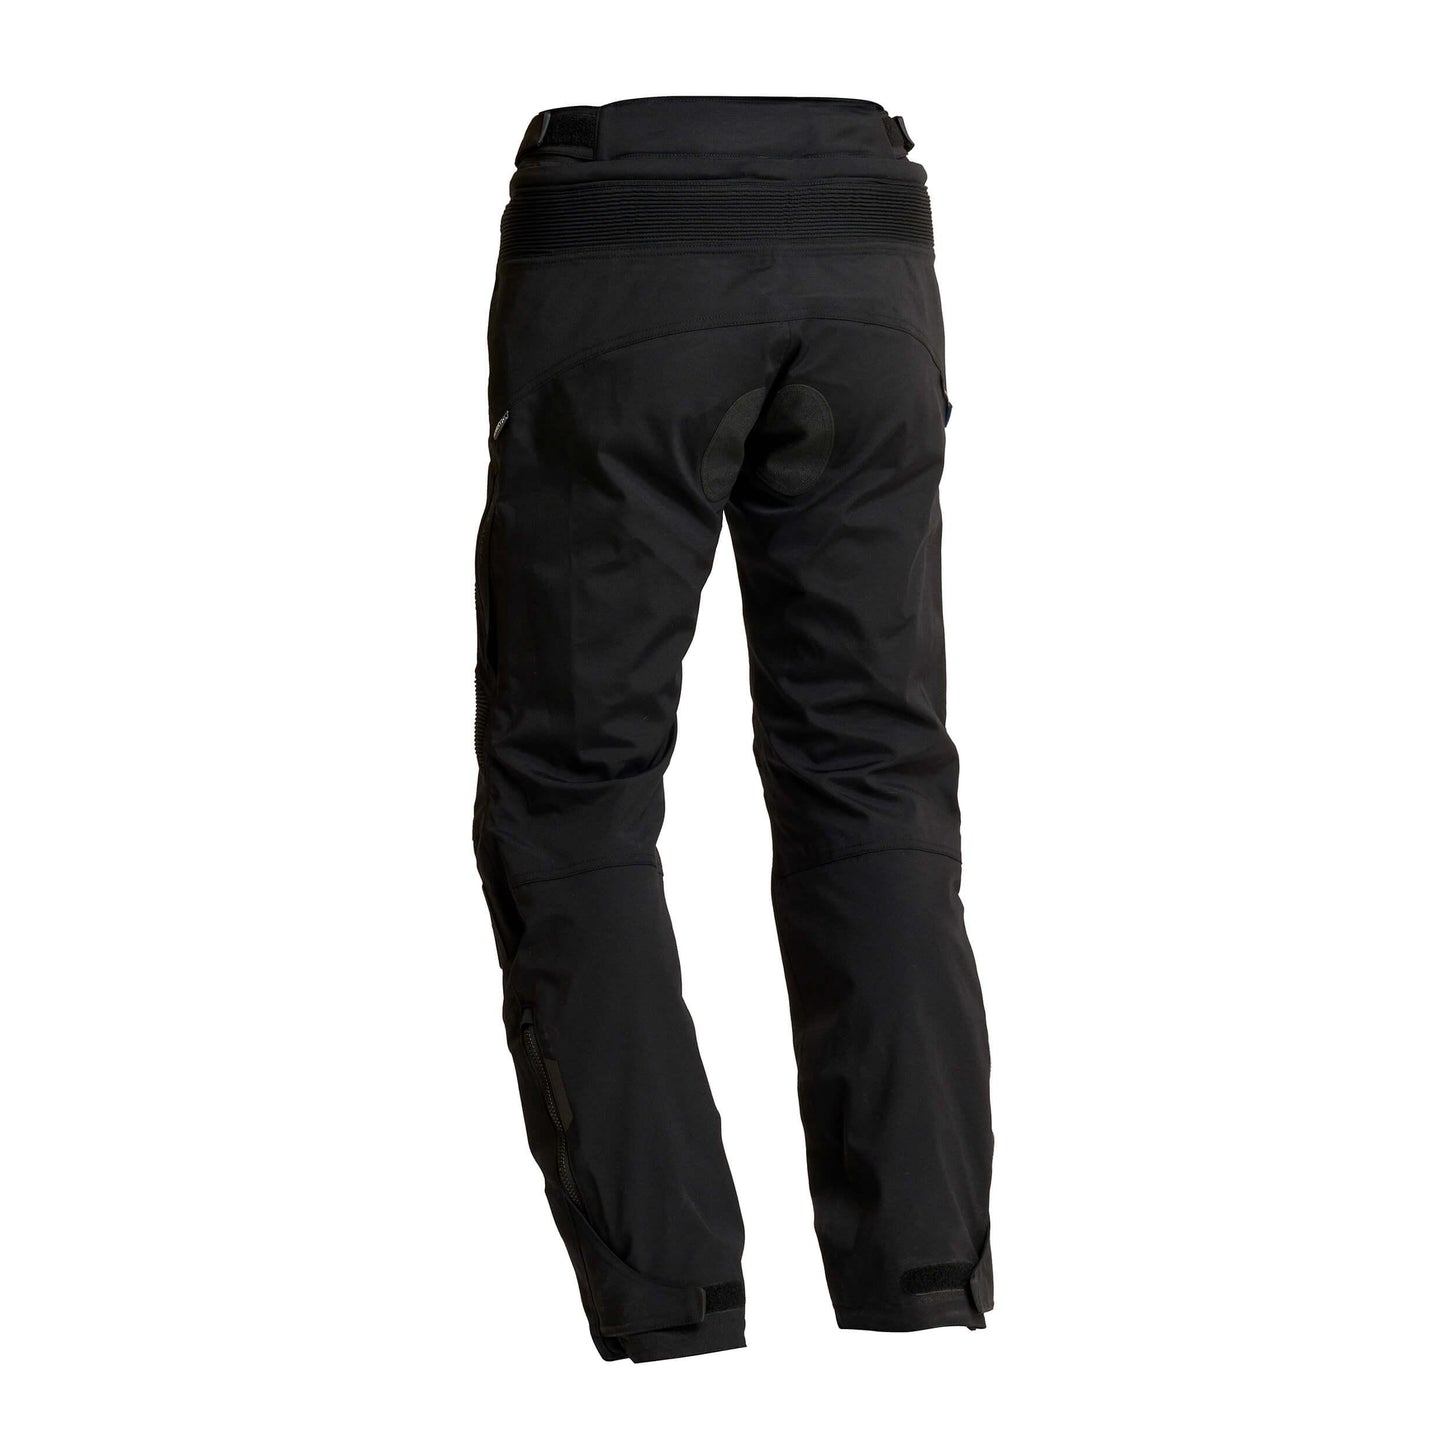 Halvarssons Laggan, premium all-season, lightweight full stretch 2-layer laminated textile pants with good ventilation and safety